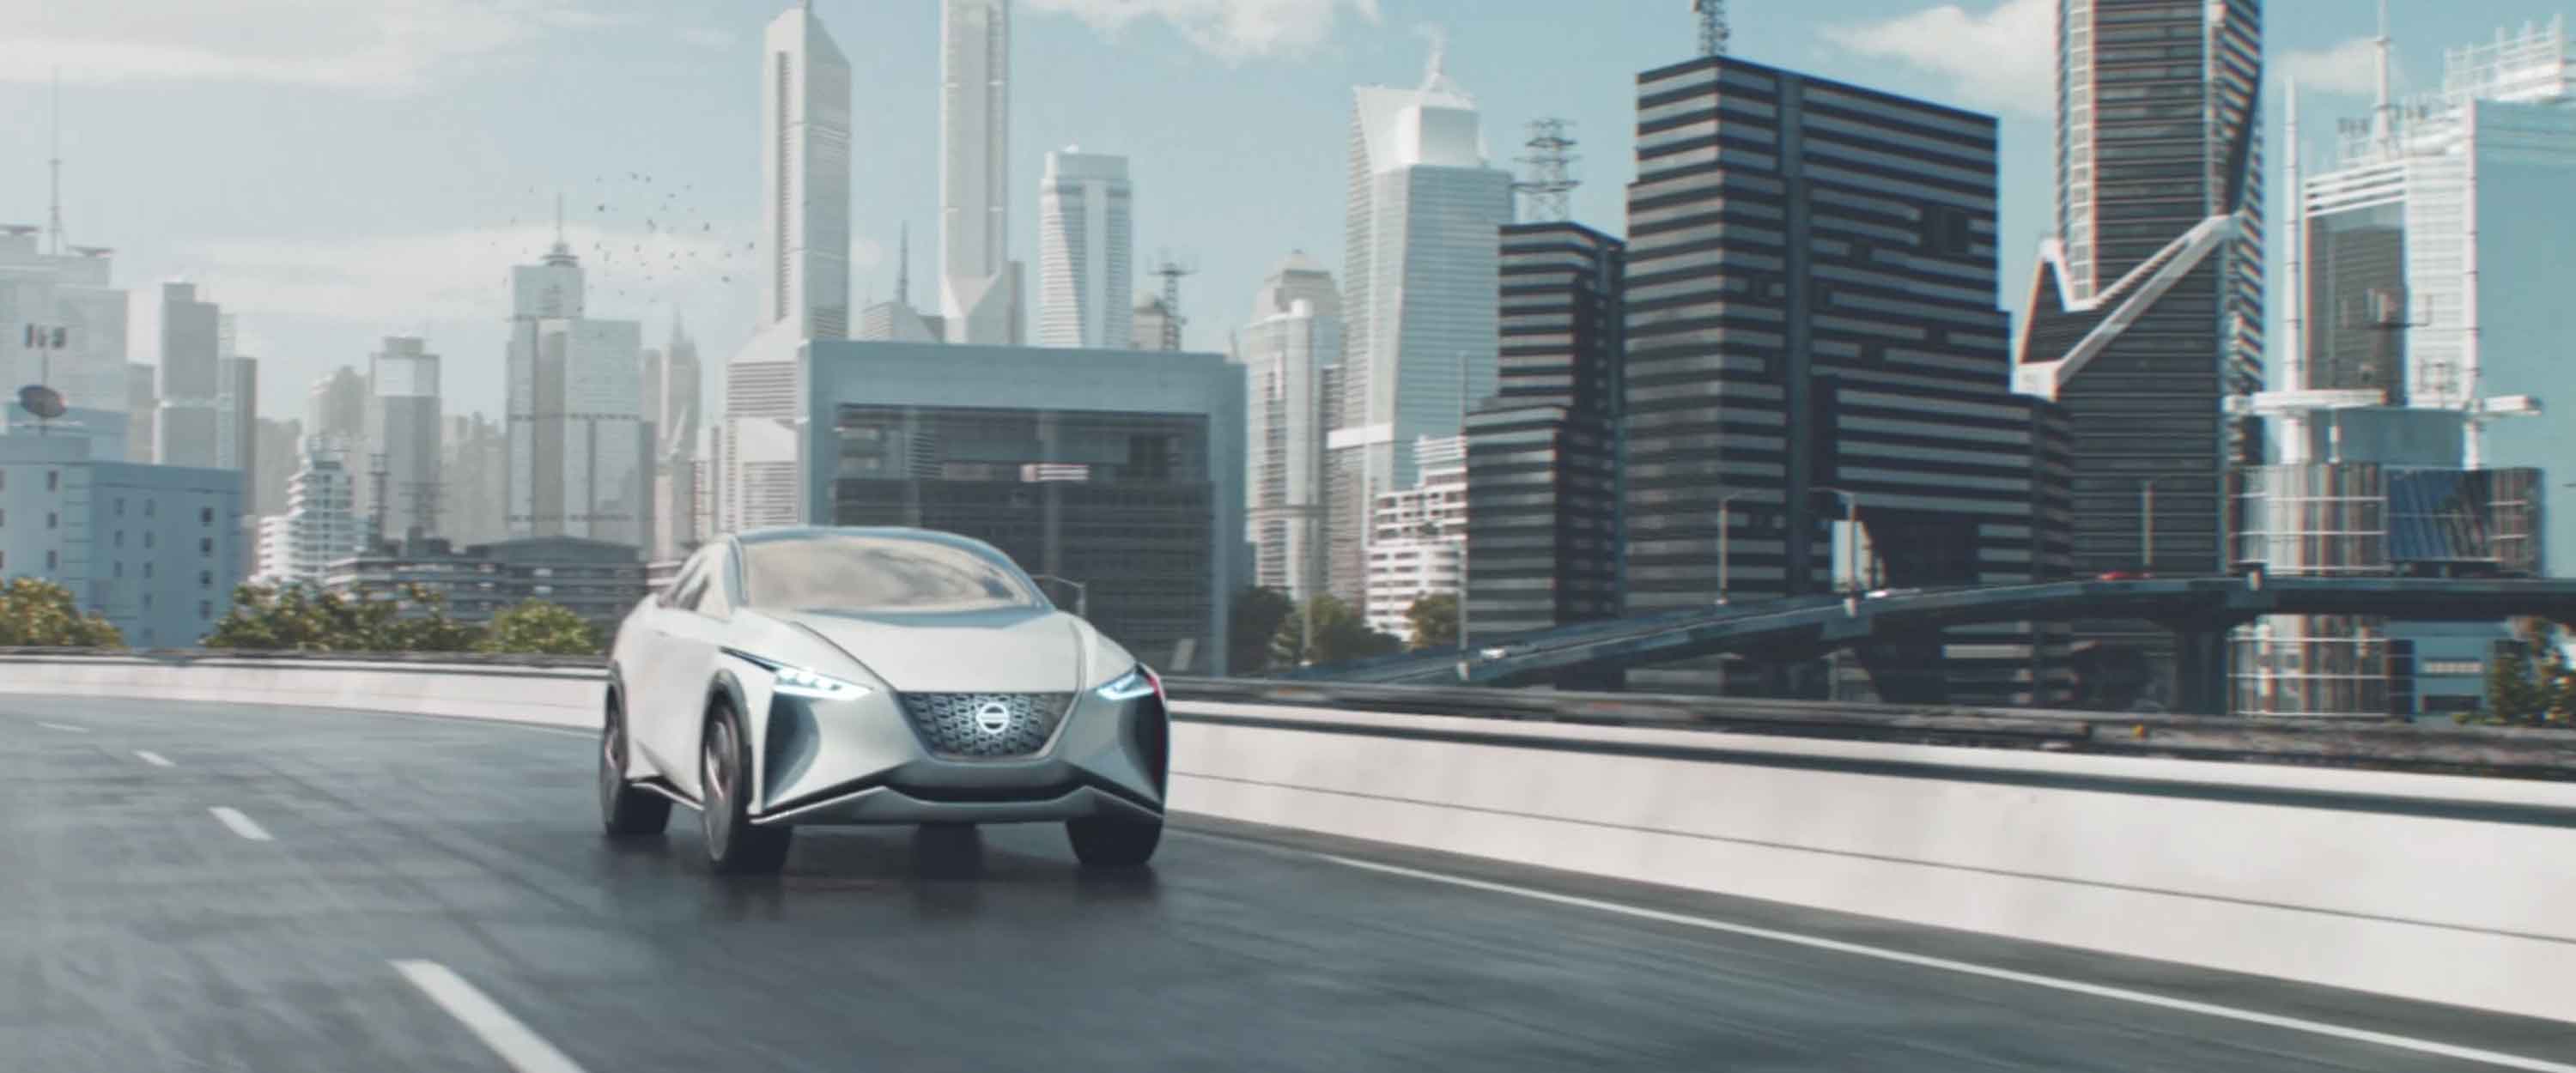 Nissan Intelligent Mobility intro video